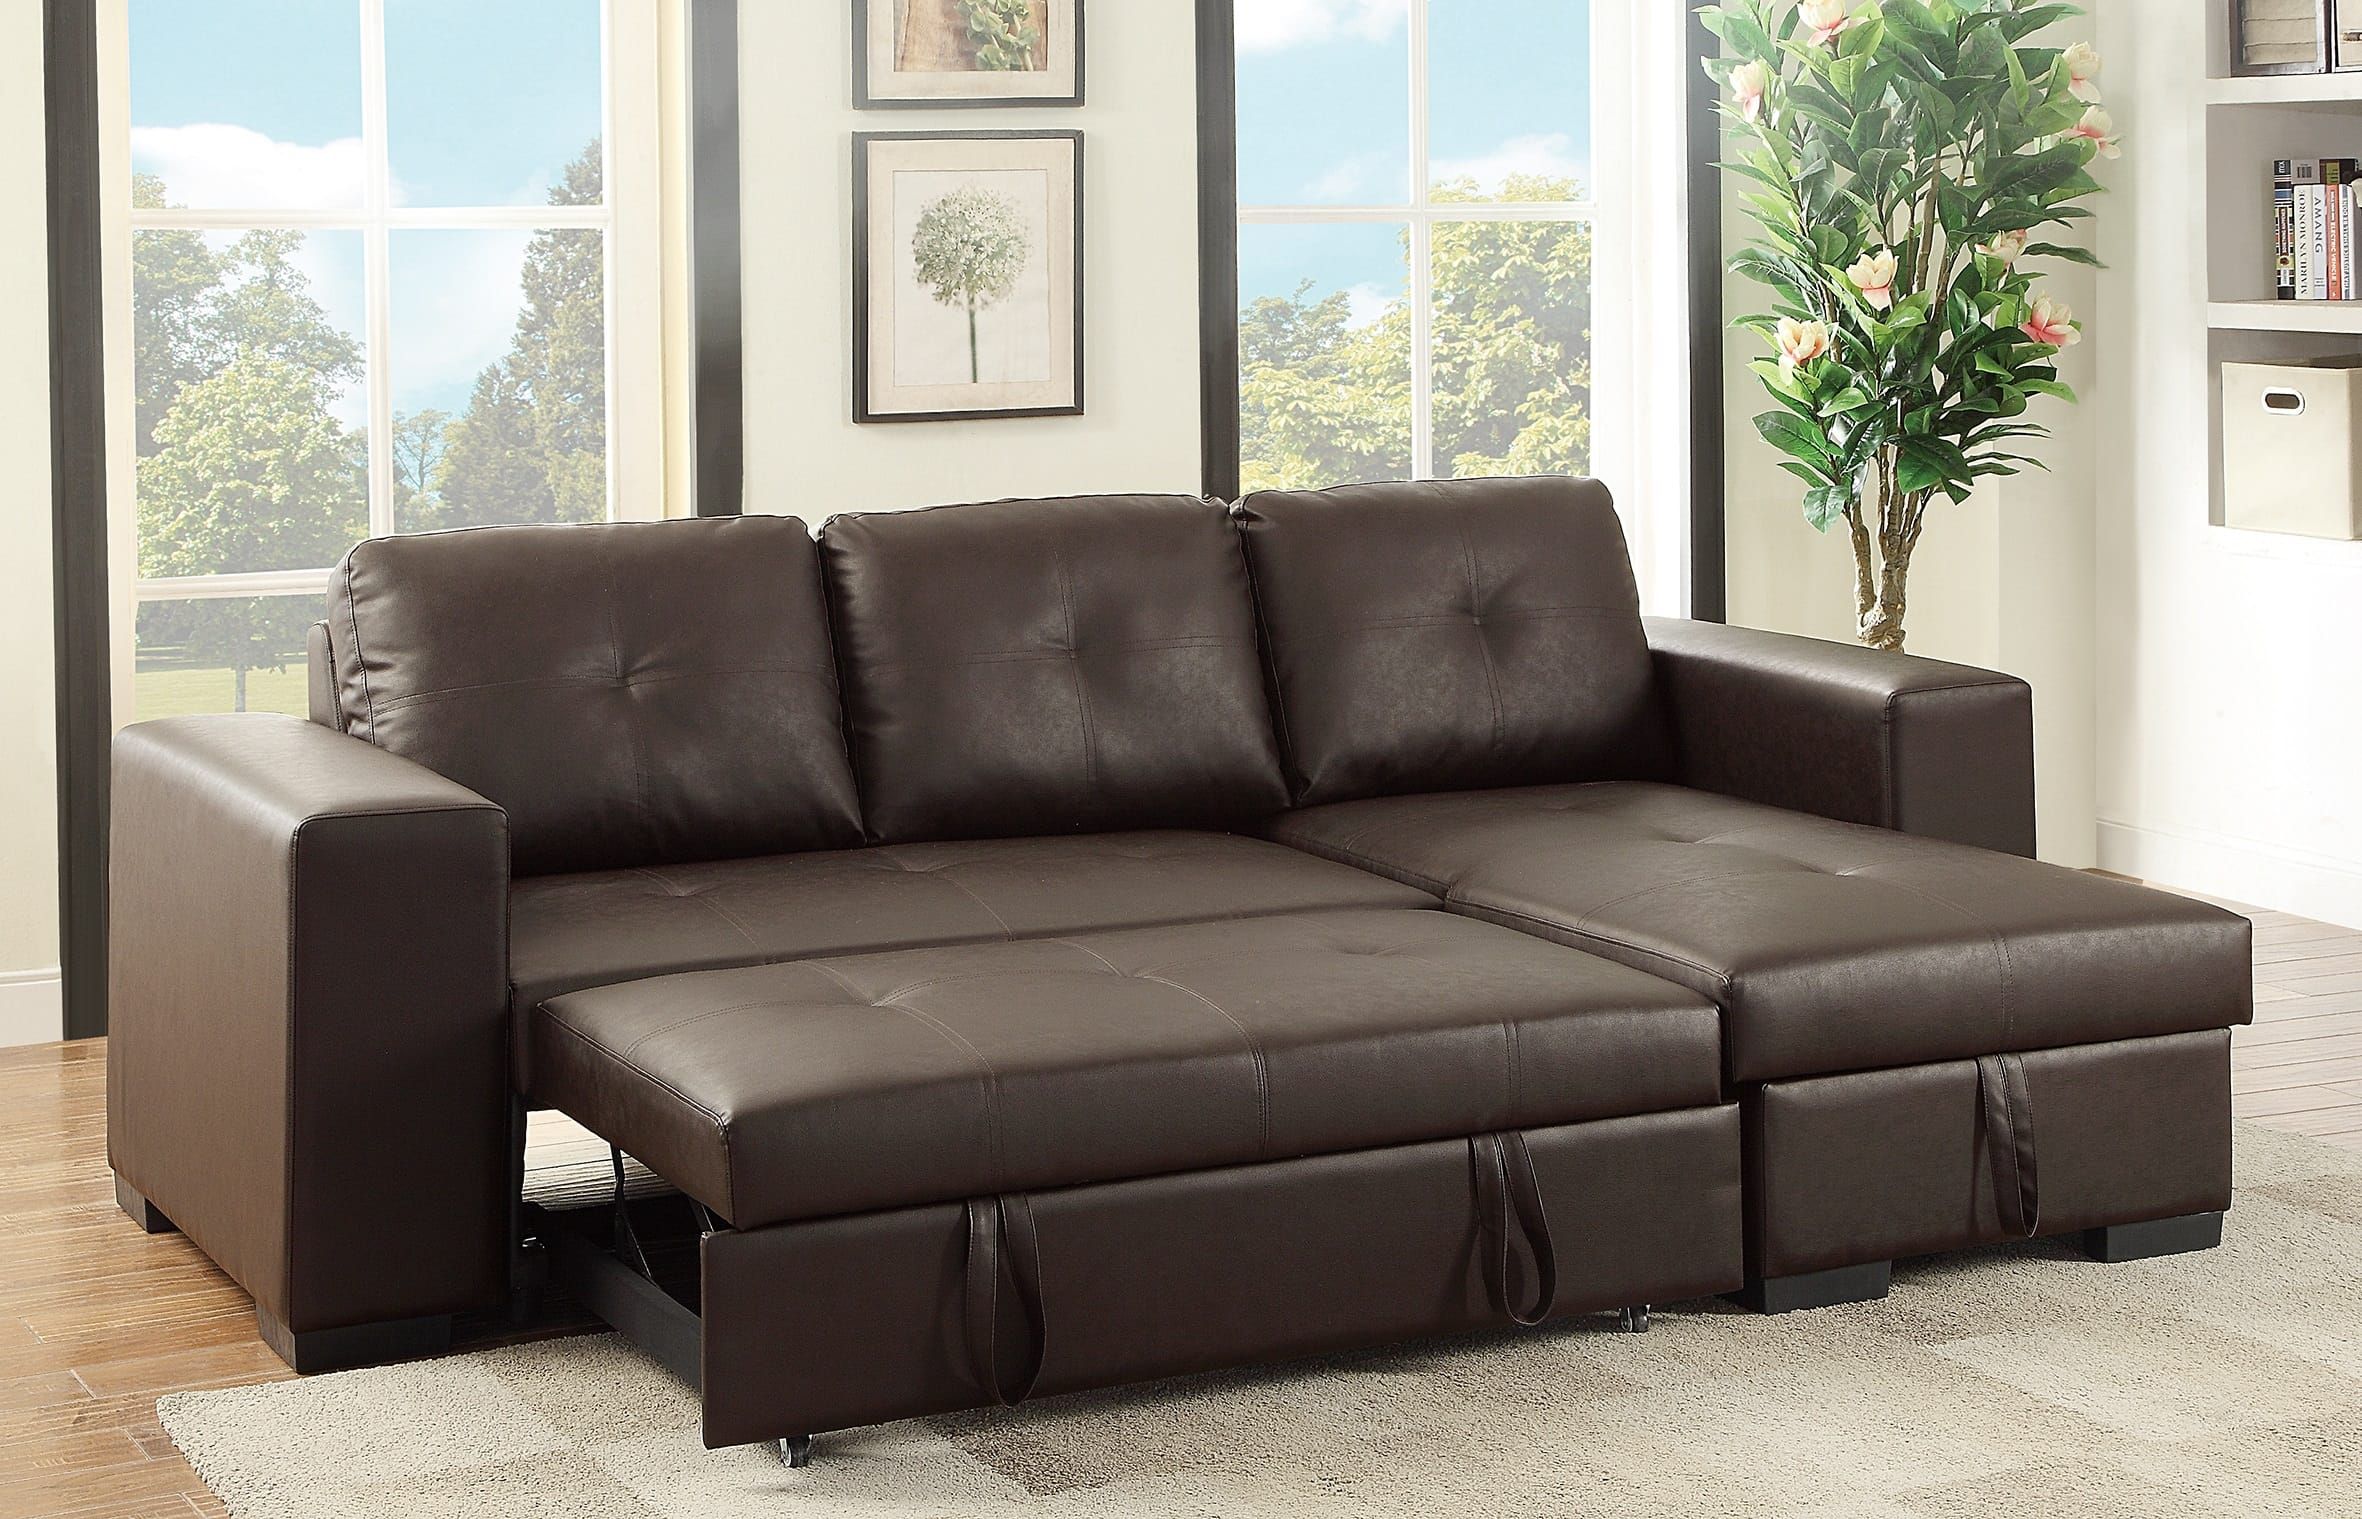 F6930 Espresso Convertible Sectional Sofapoundex Pertaining To 3 Seat Convertible Sectional Sofas (View 17 of 20)